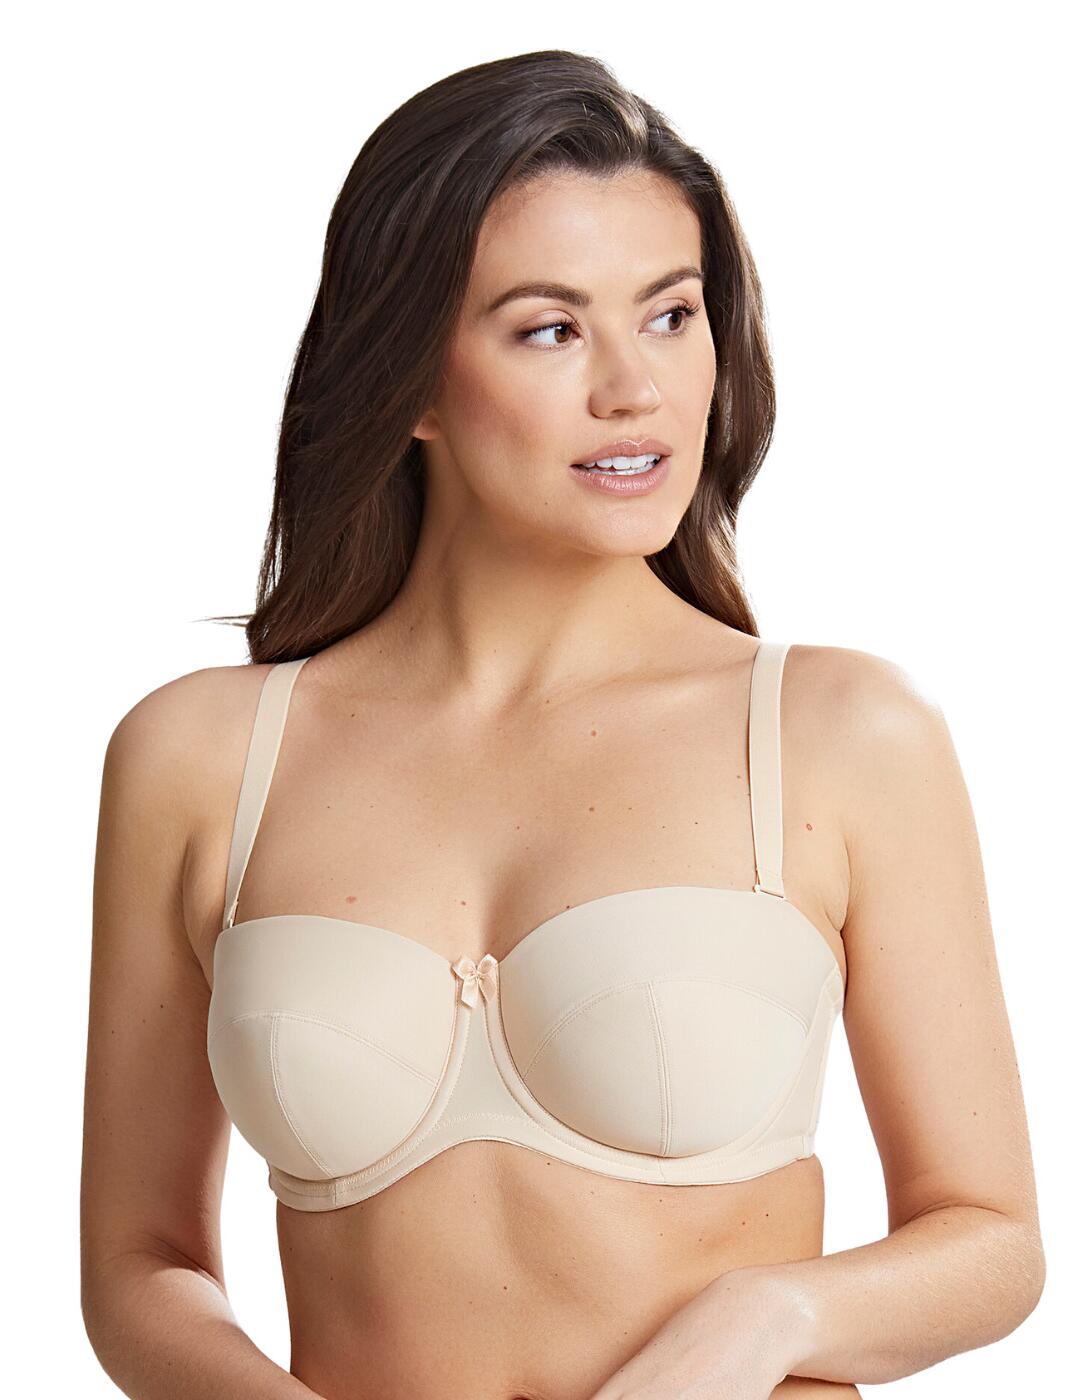 Panache Evie Strapless Bra 5320 Underwired Lingerie Moulded Padded